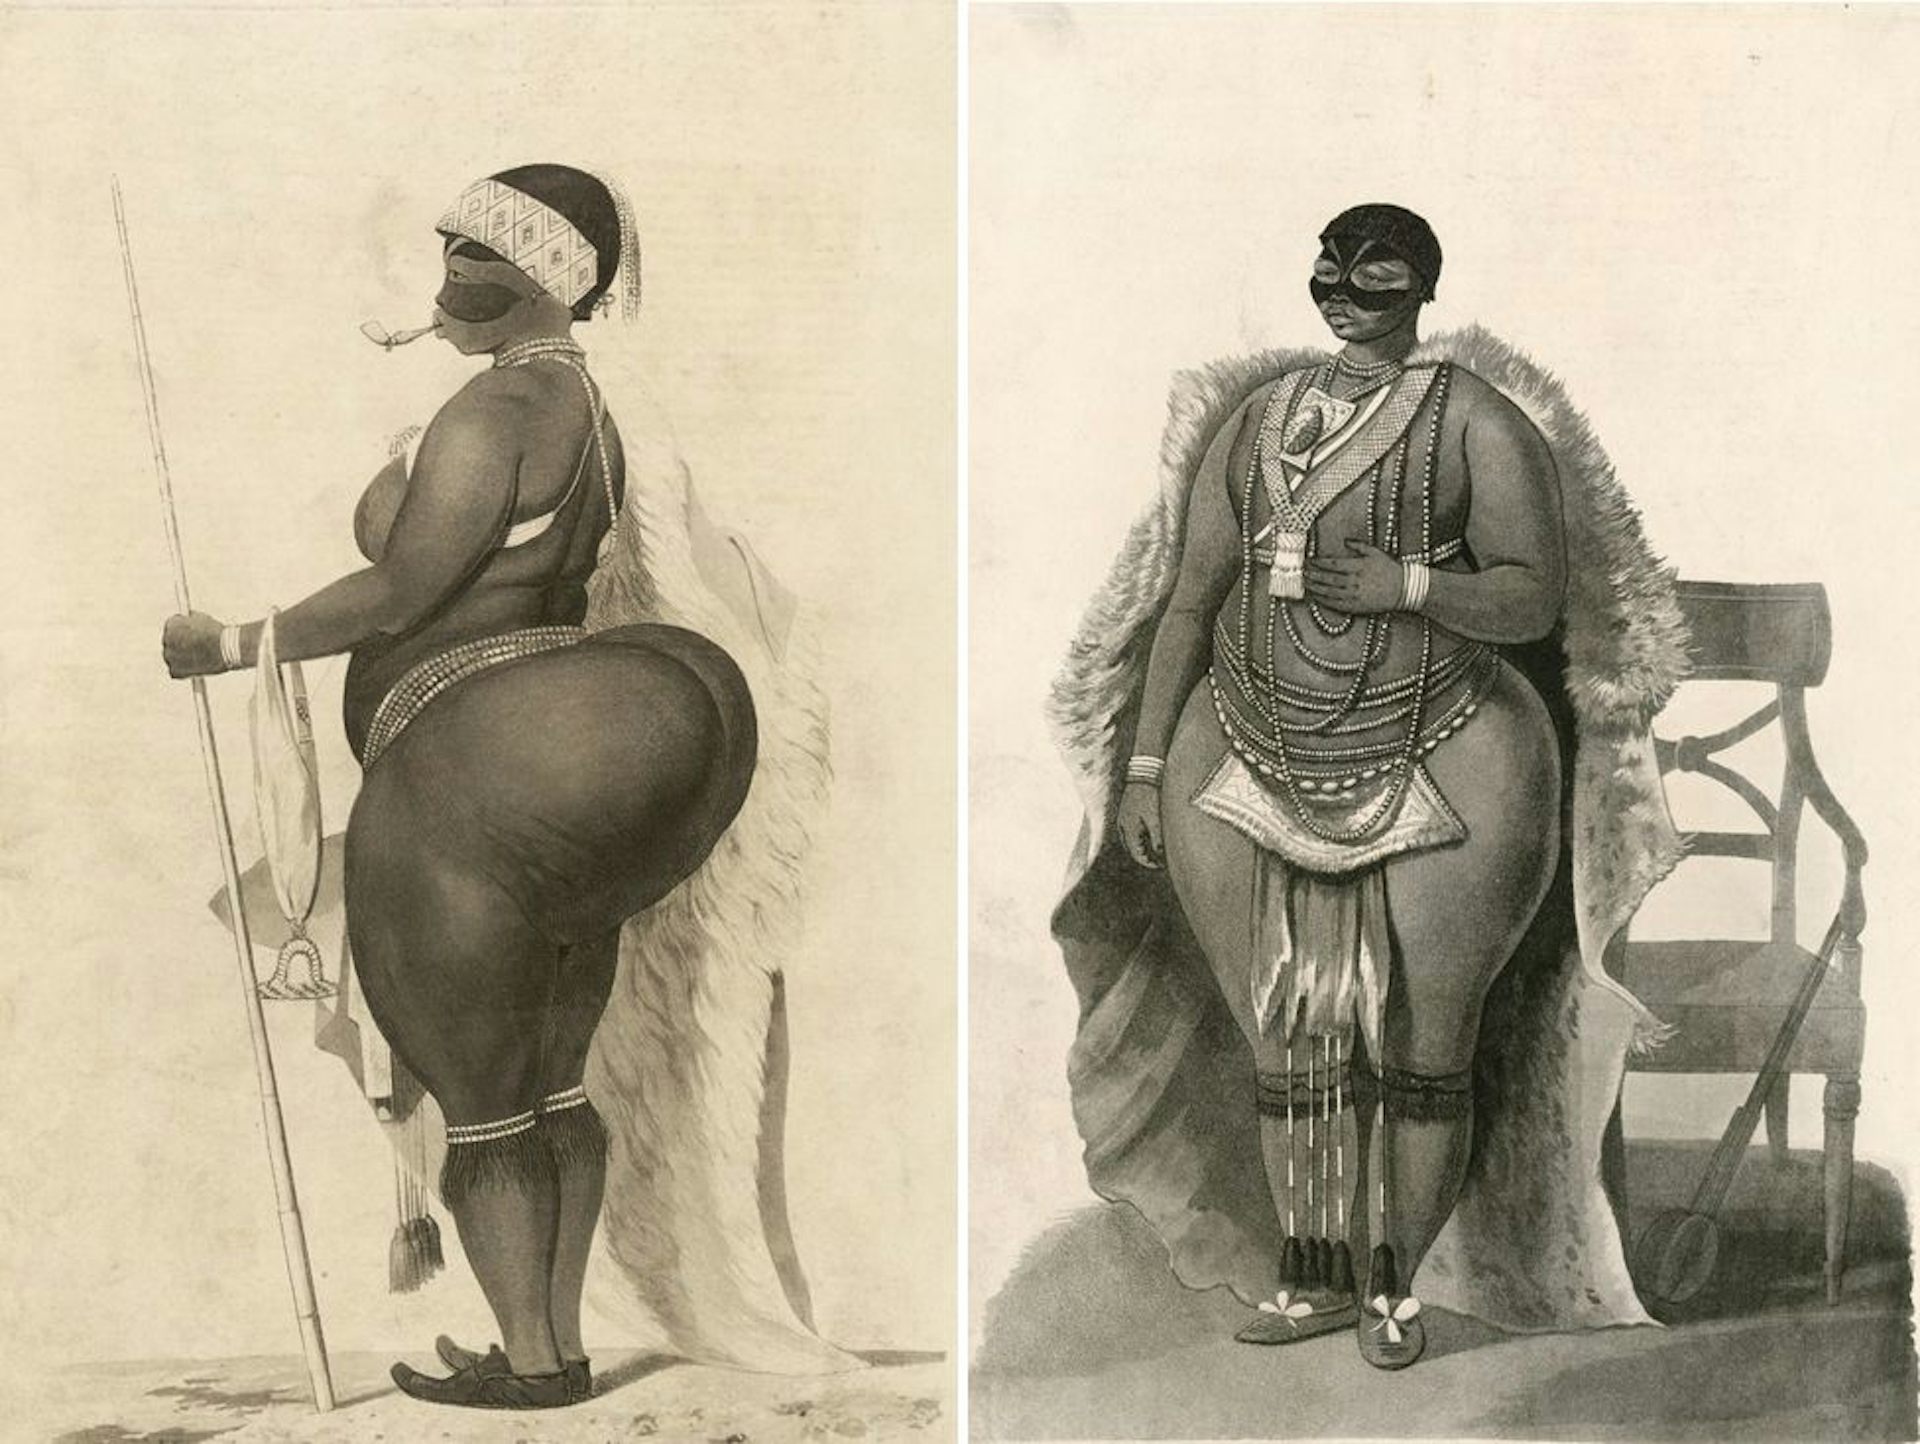 How Sarah Baartmans hips went from a symbol of exploitation to a source of empowerment for Black women photo